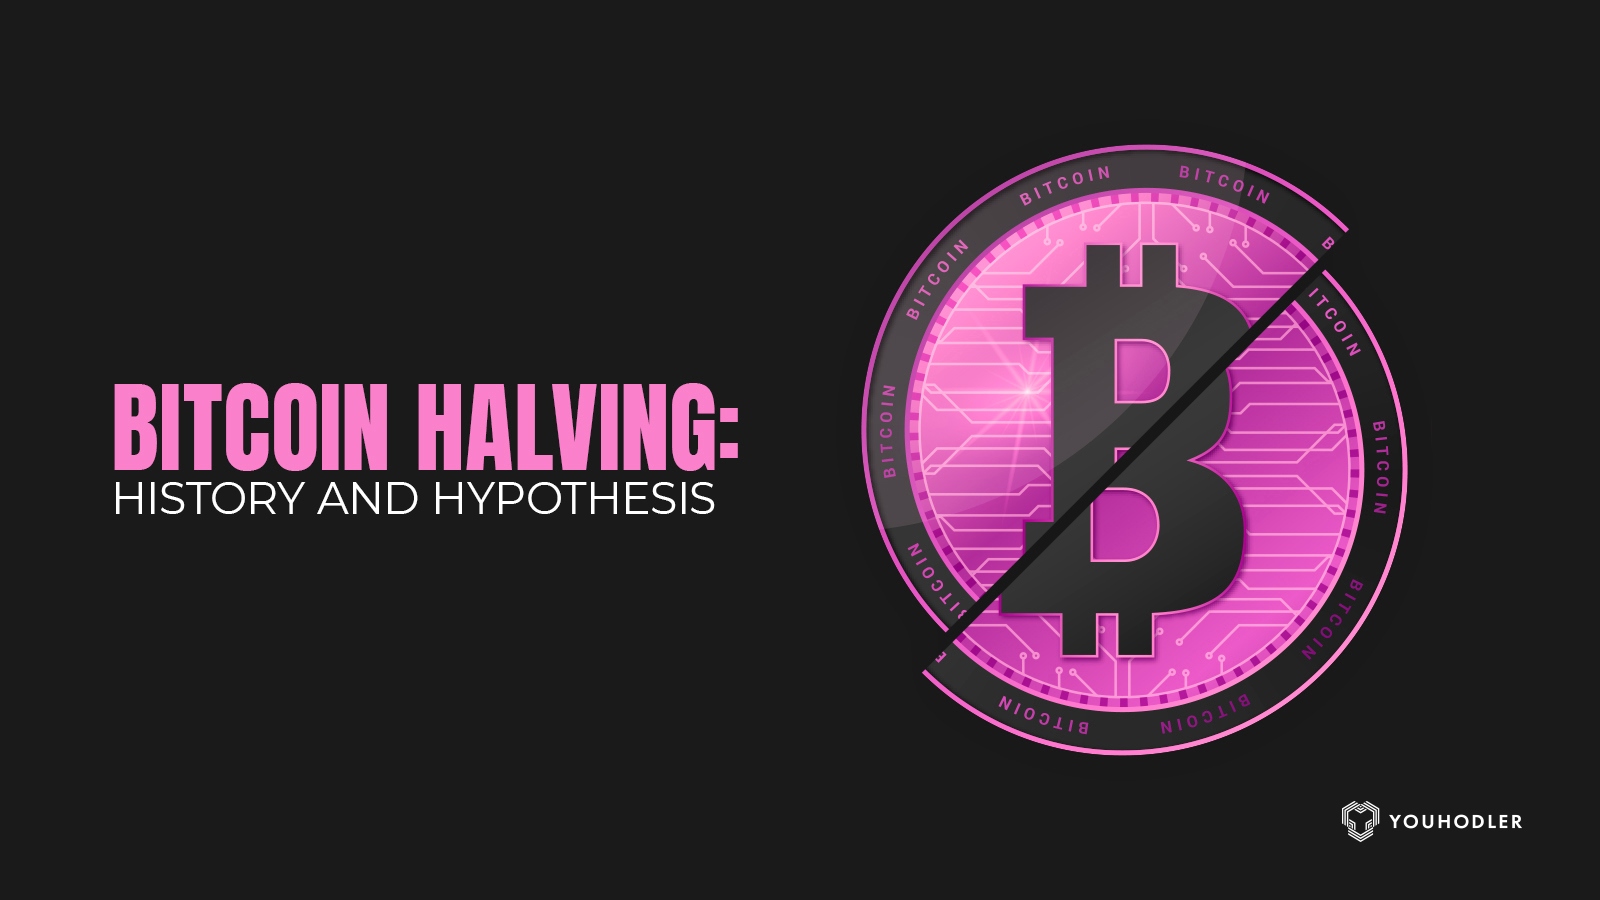 Bitcoin Halving: Why Institutional Investors May Not Care